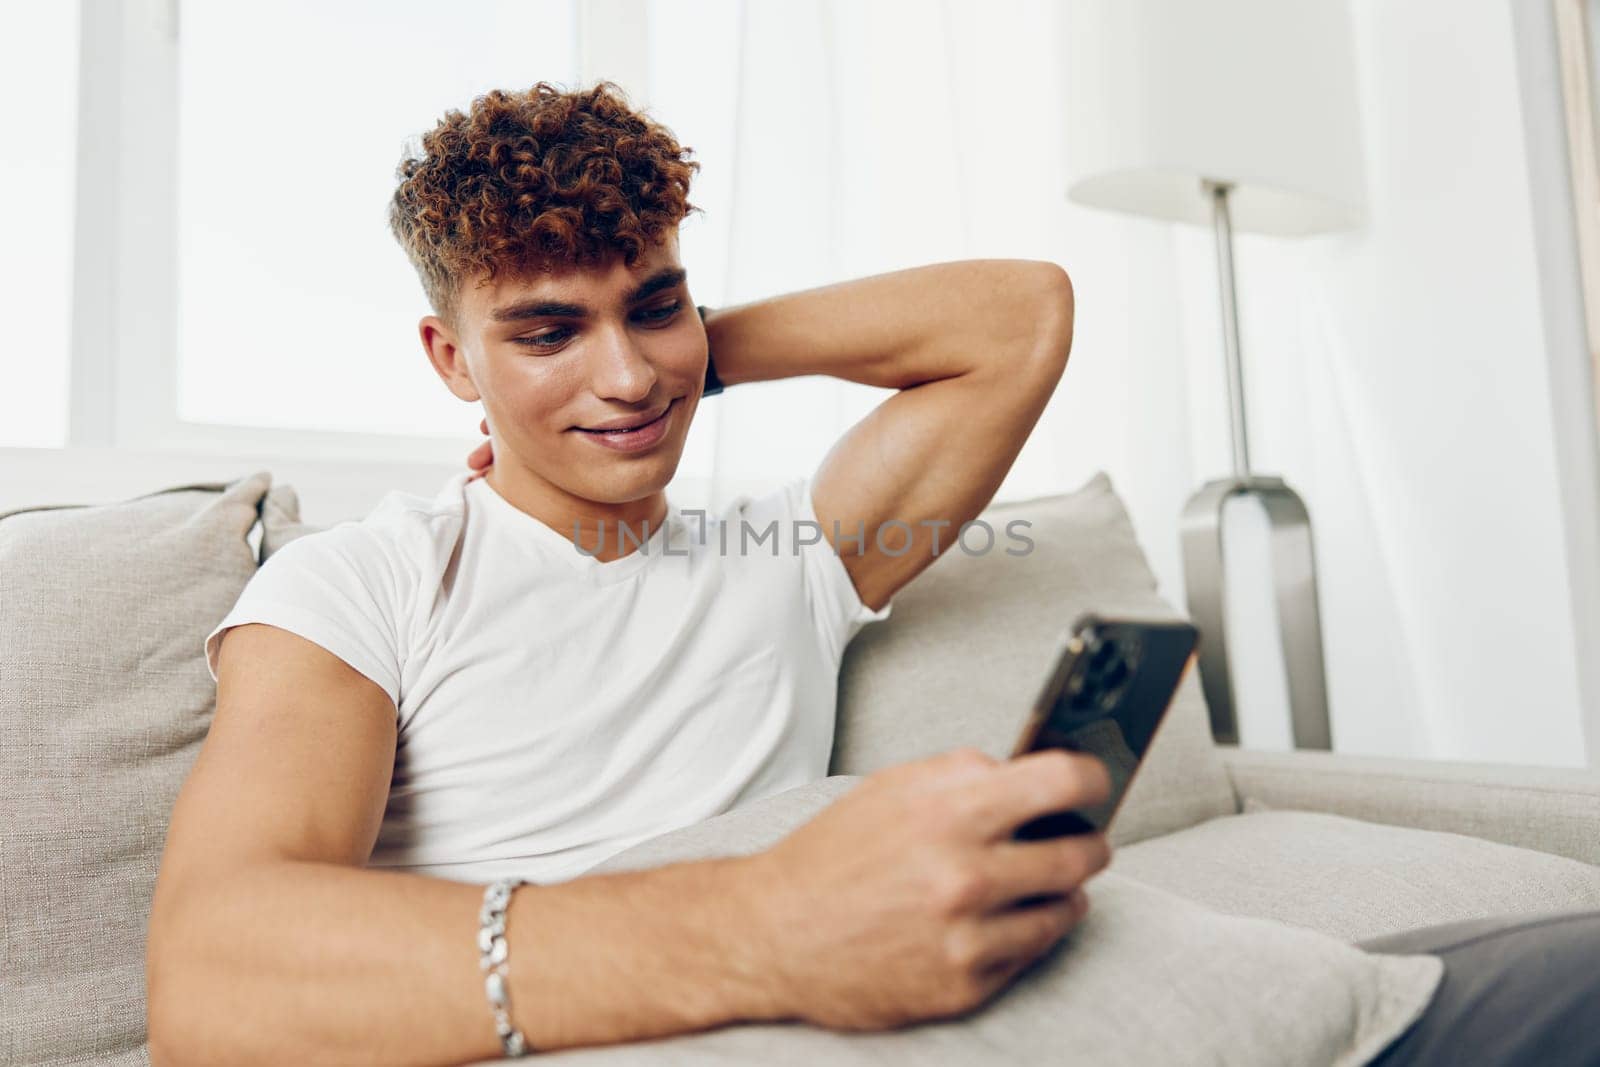 man interior mockup message person mobile online sports student young smile sitting phone internet adult cyberspace text message home smartphone technology